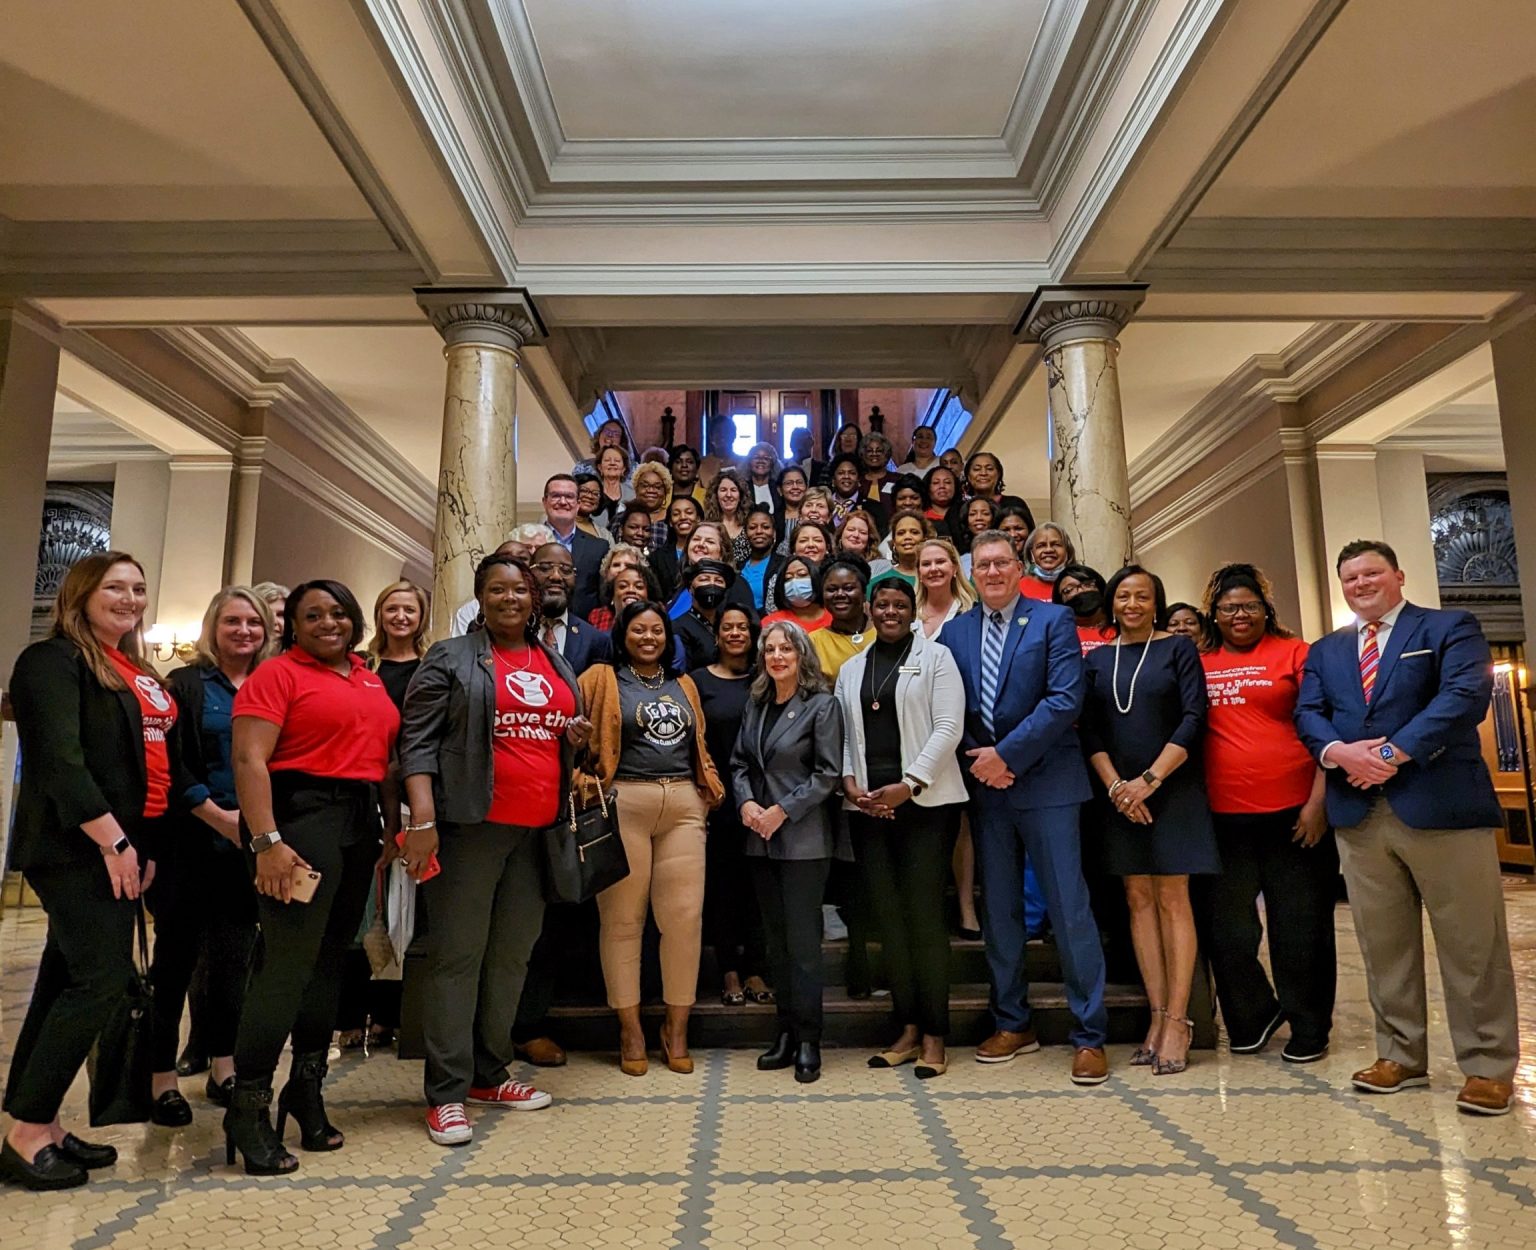 Around 80 people attended Early Childhood Capitol Day 2023